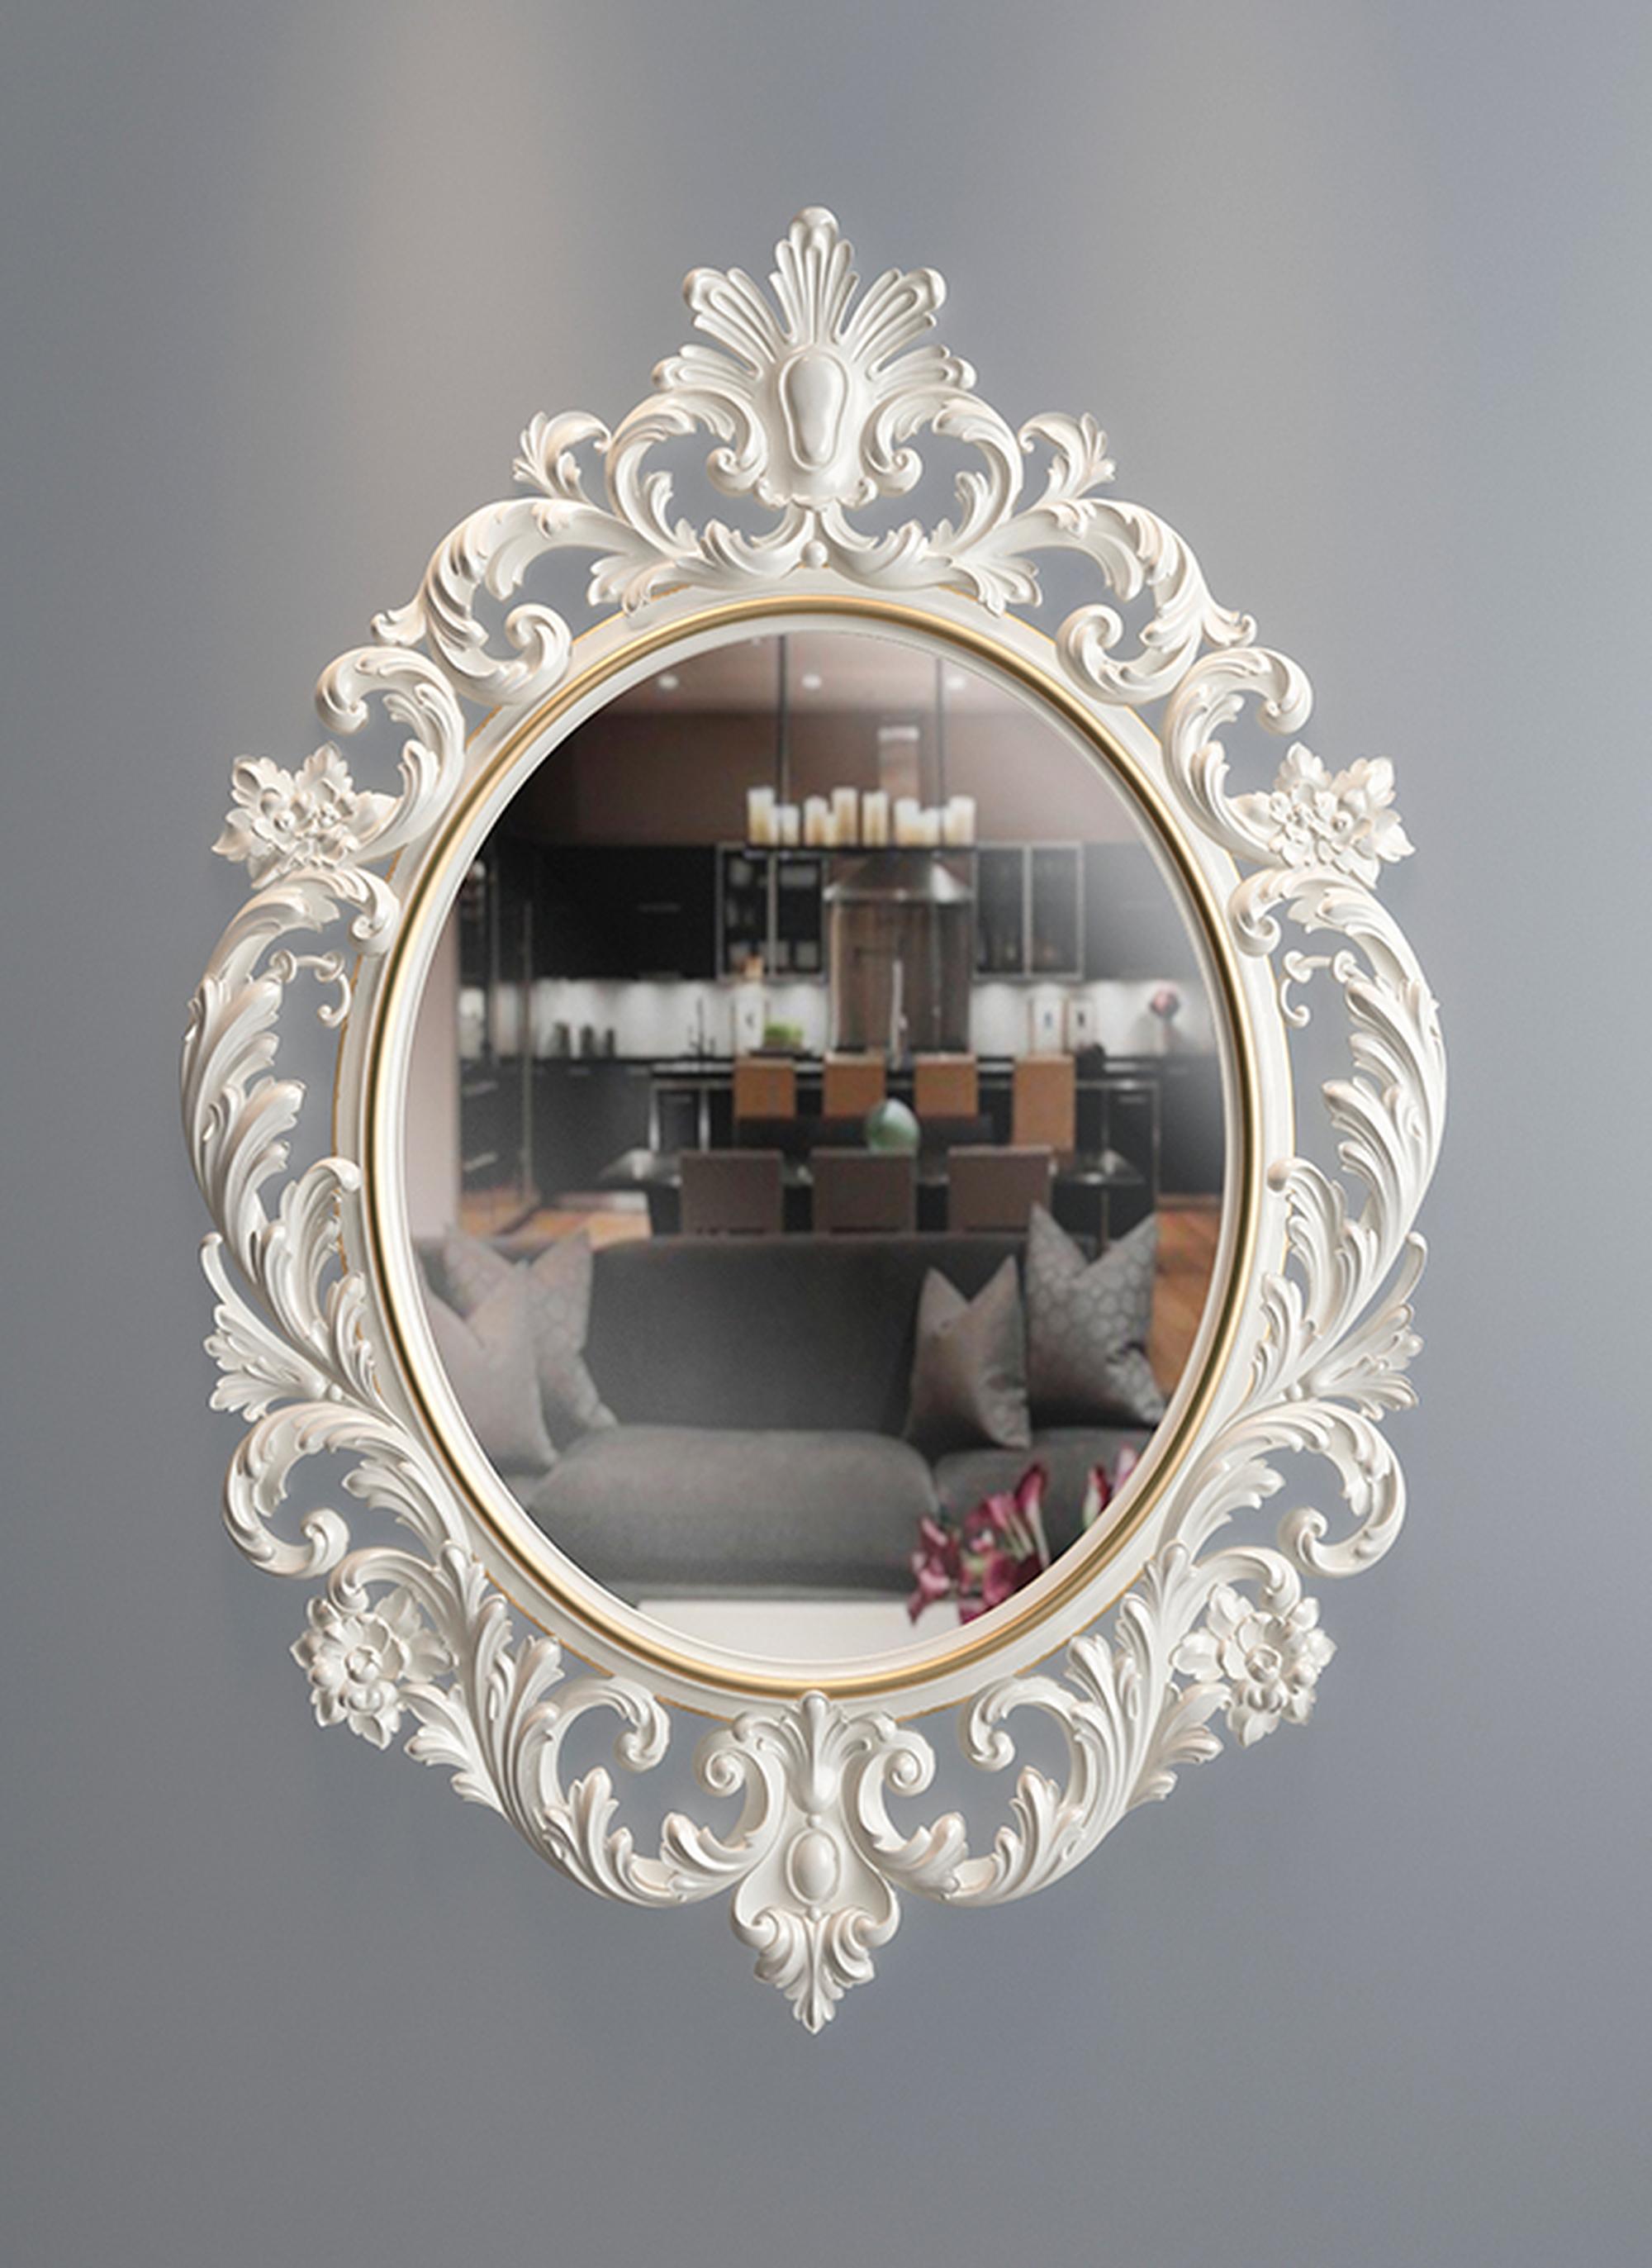 Unfinished high quality wood carving mirror frame from oak or beech of your choice.

>> SKU: RM-041

>> Dimensions (A x B x C x D):

- 45.28